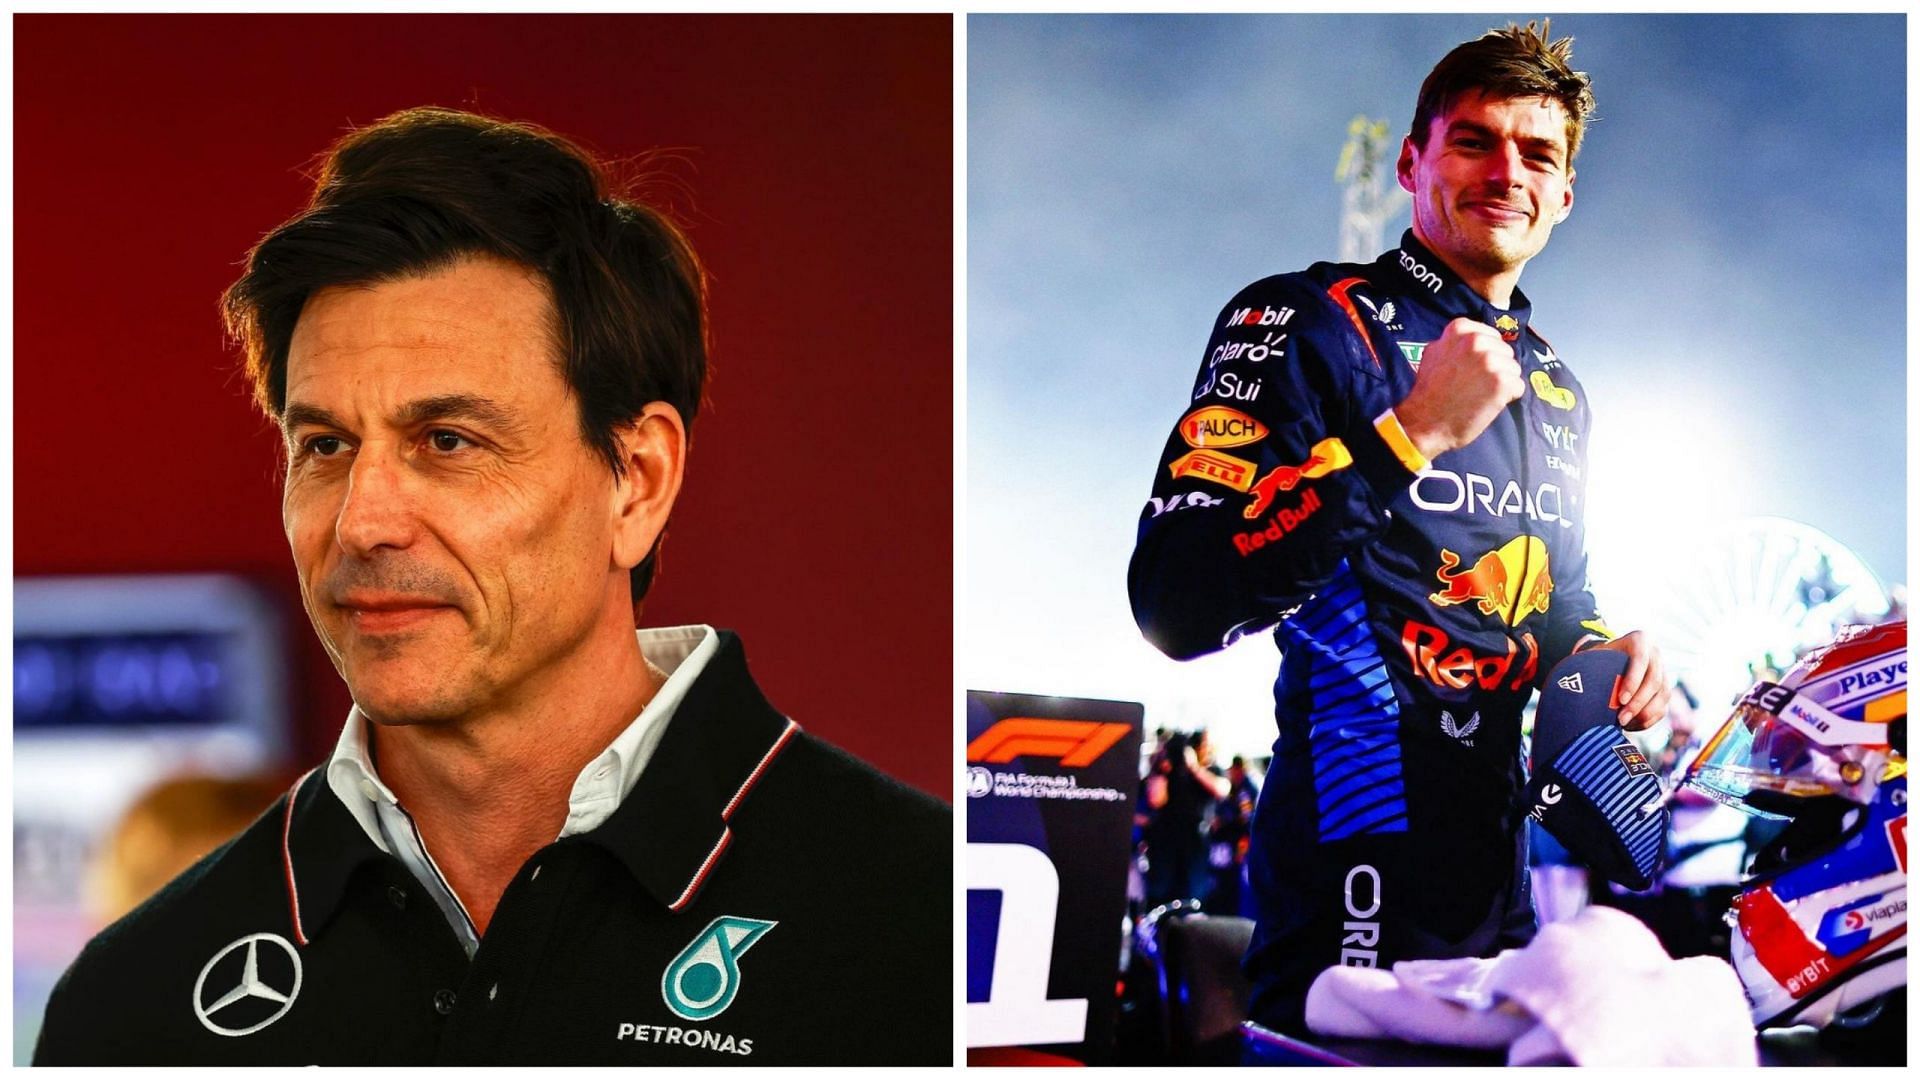 Mercedes team principal Toto Wolff finds no reason for Max Verstappen to leave Red Bull currently